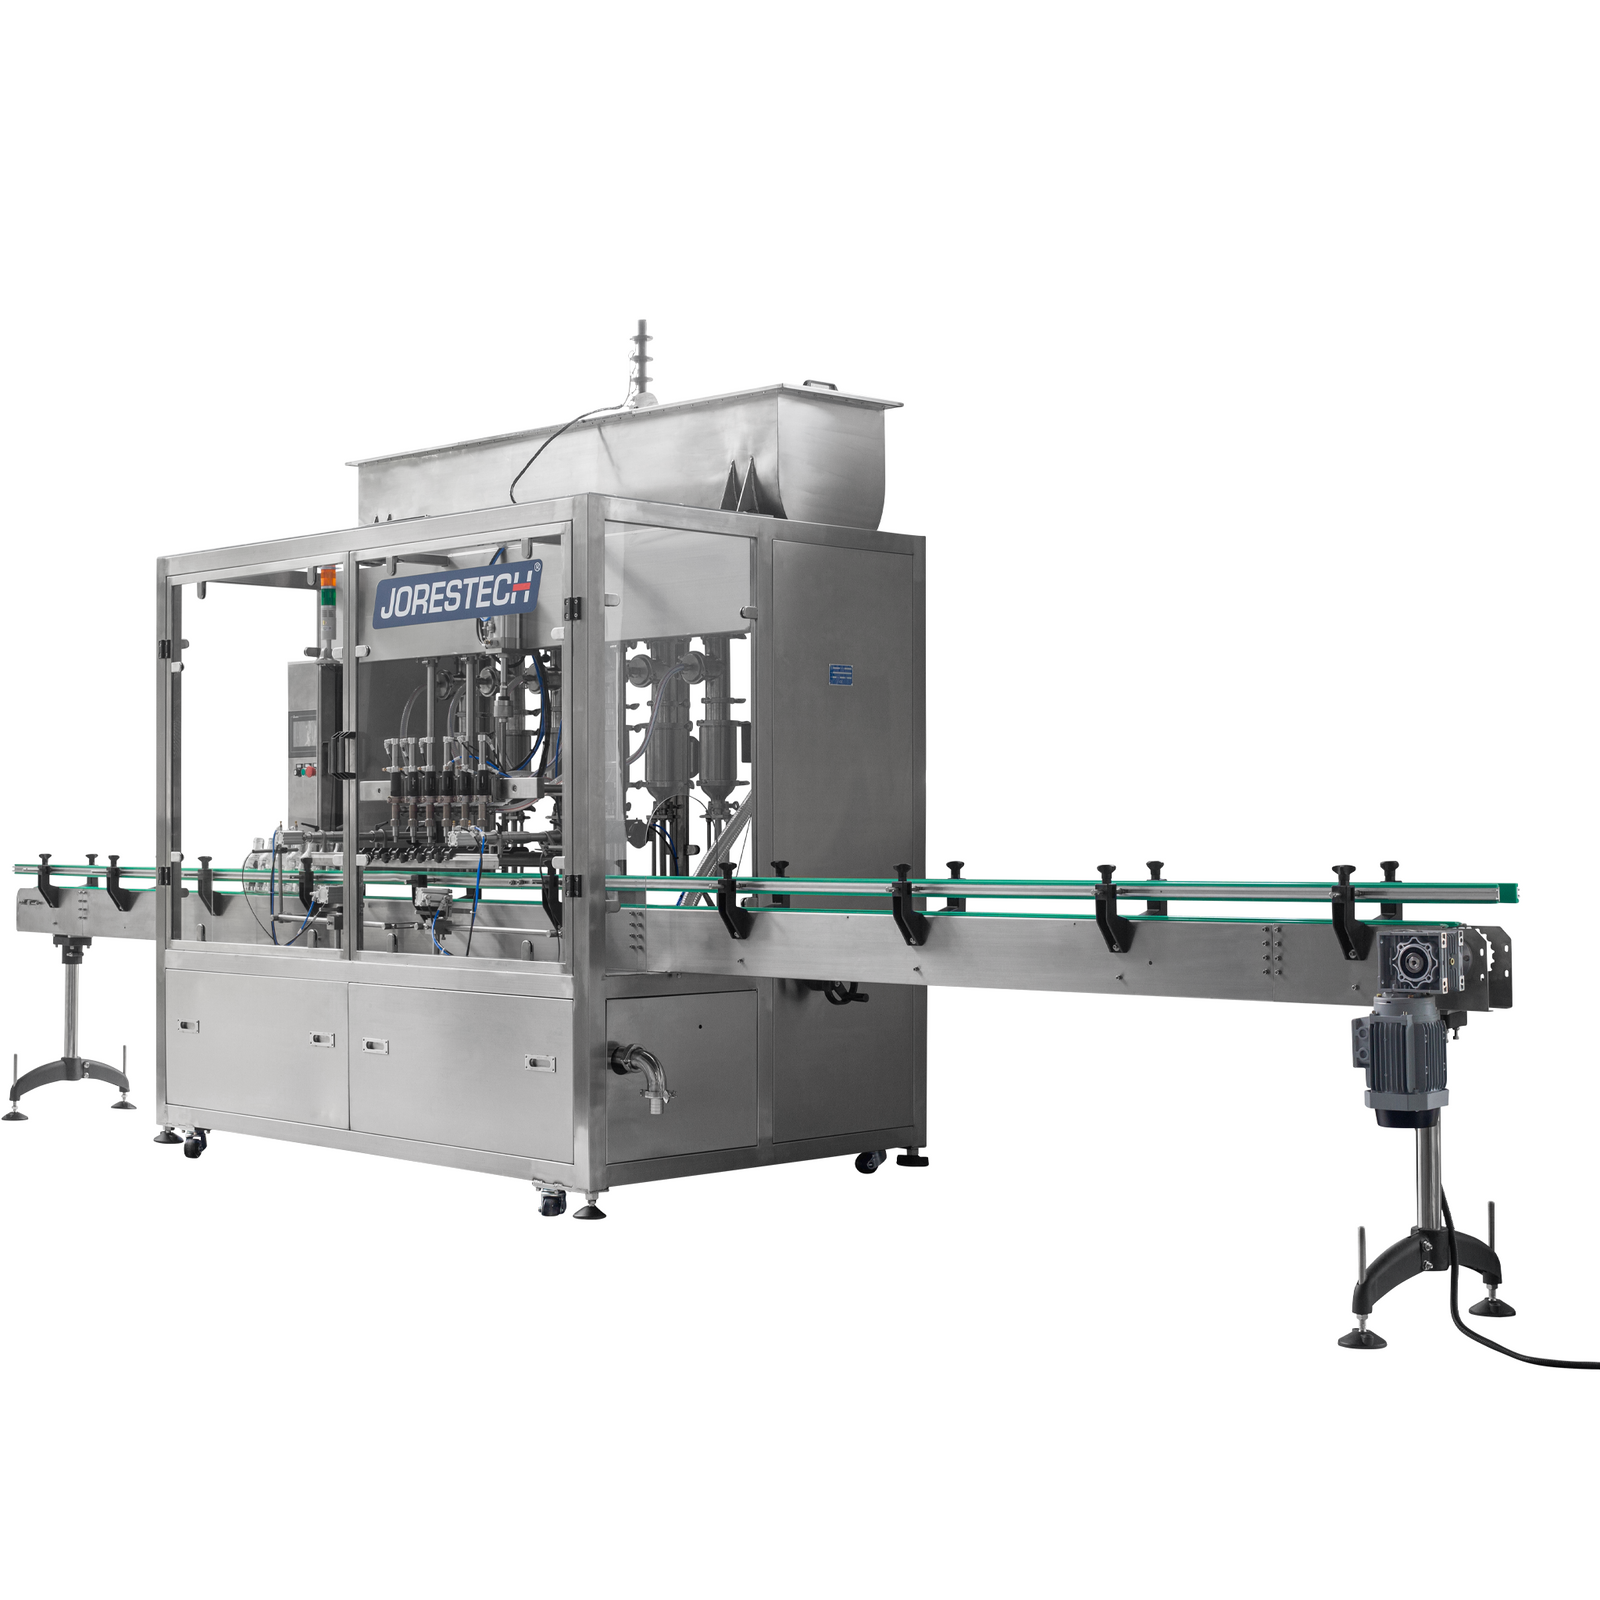 diagonal view of the jorestech 6 head inline piston filling machine with conveyor over white background